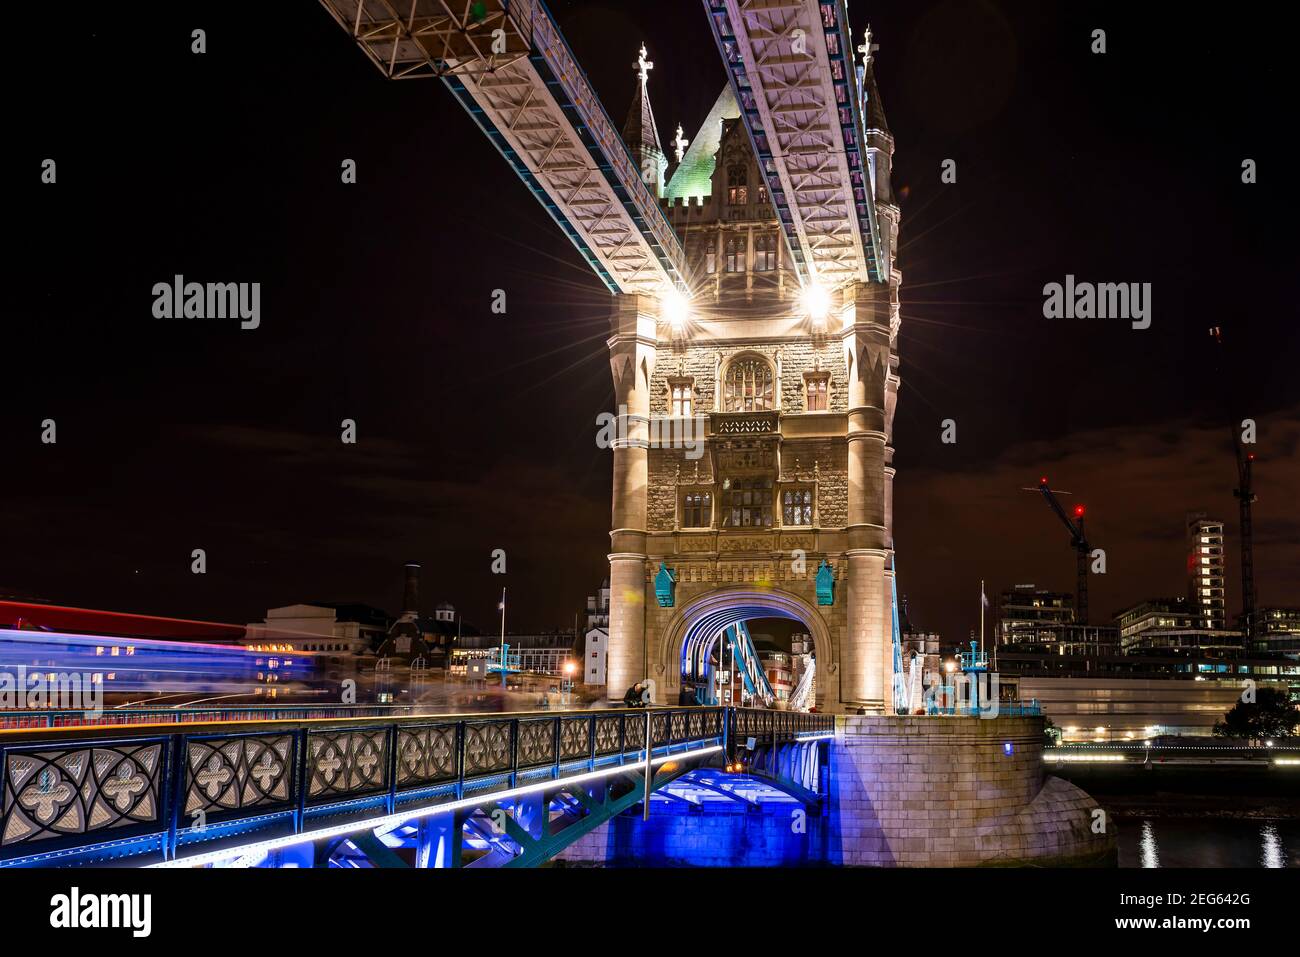 Magnificent Tower Bridge at night in London, England, UK Stock Photo